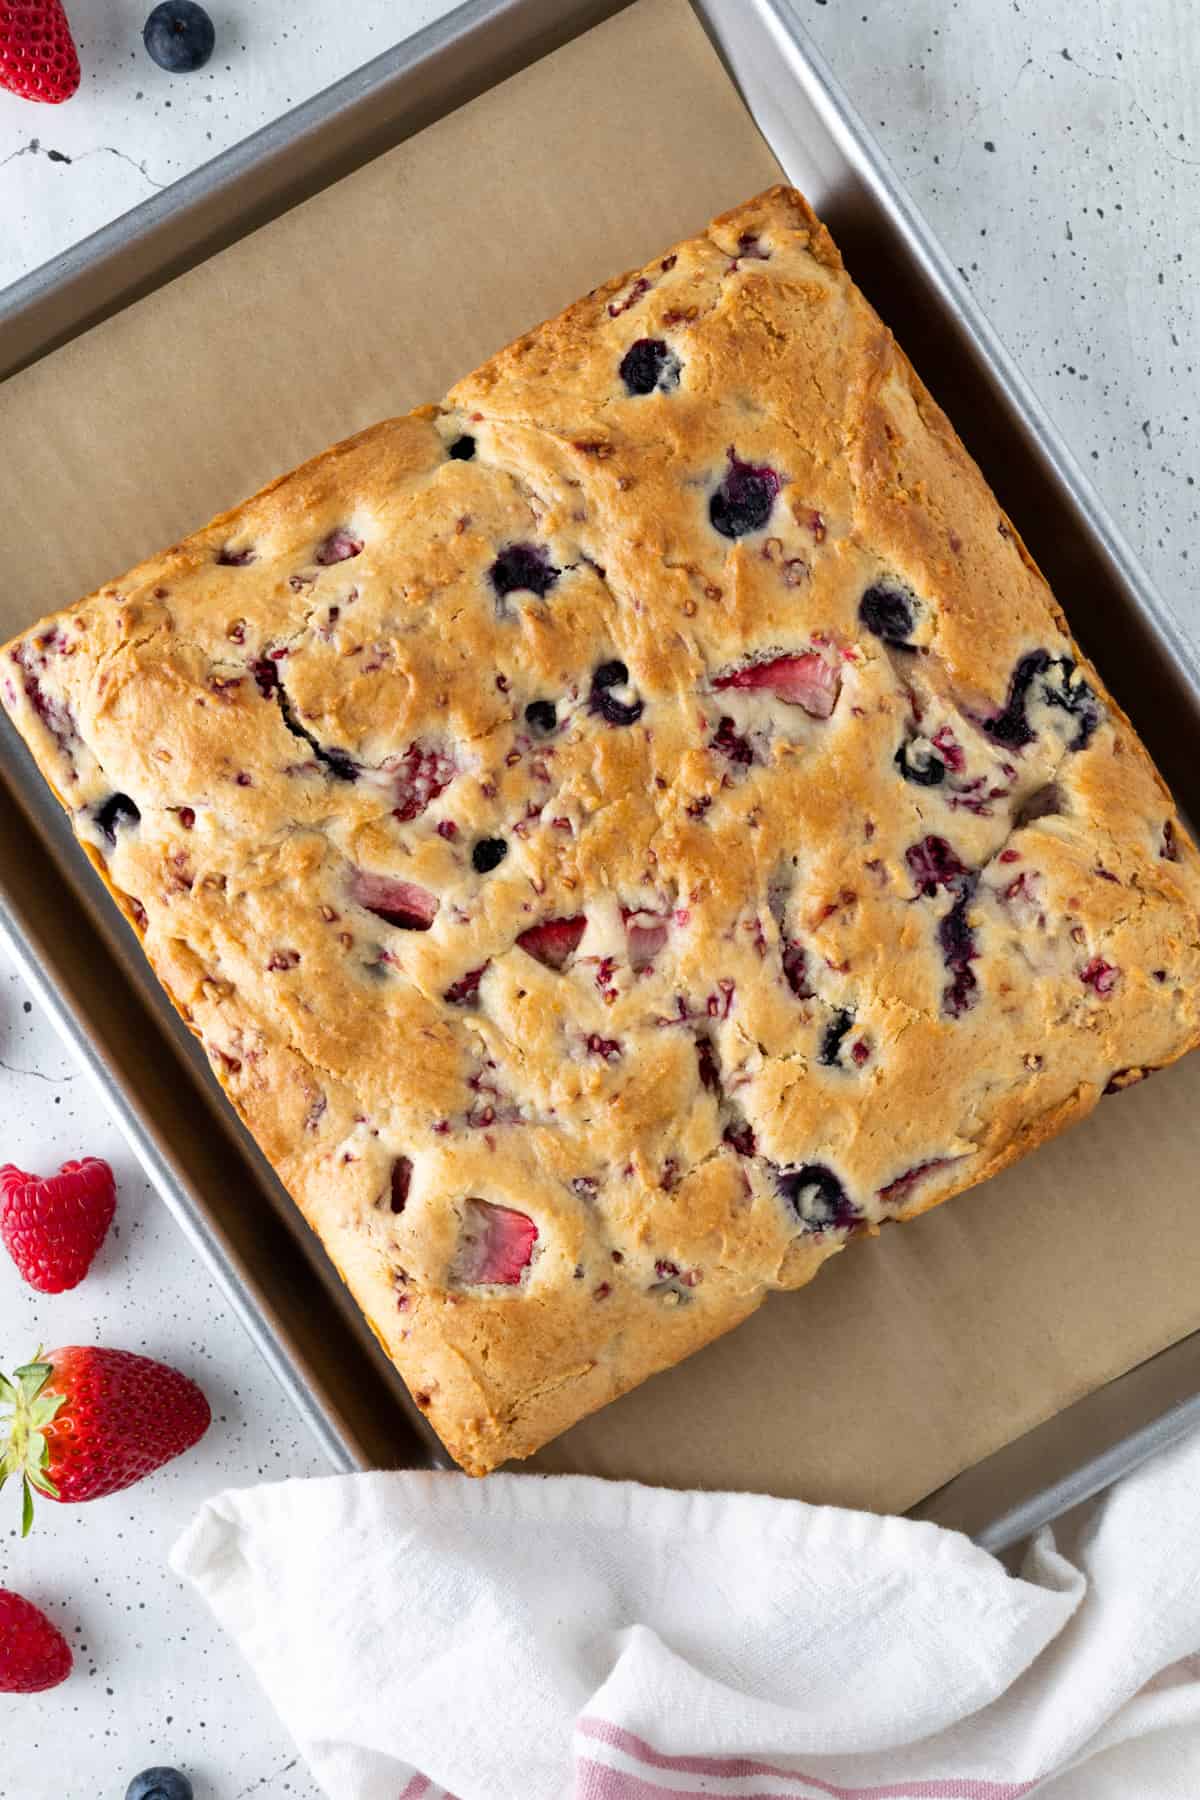 An unfrosted mixed berry cake on a parchment-lined tray.